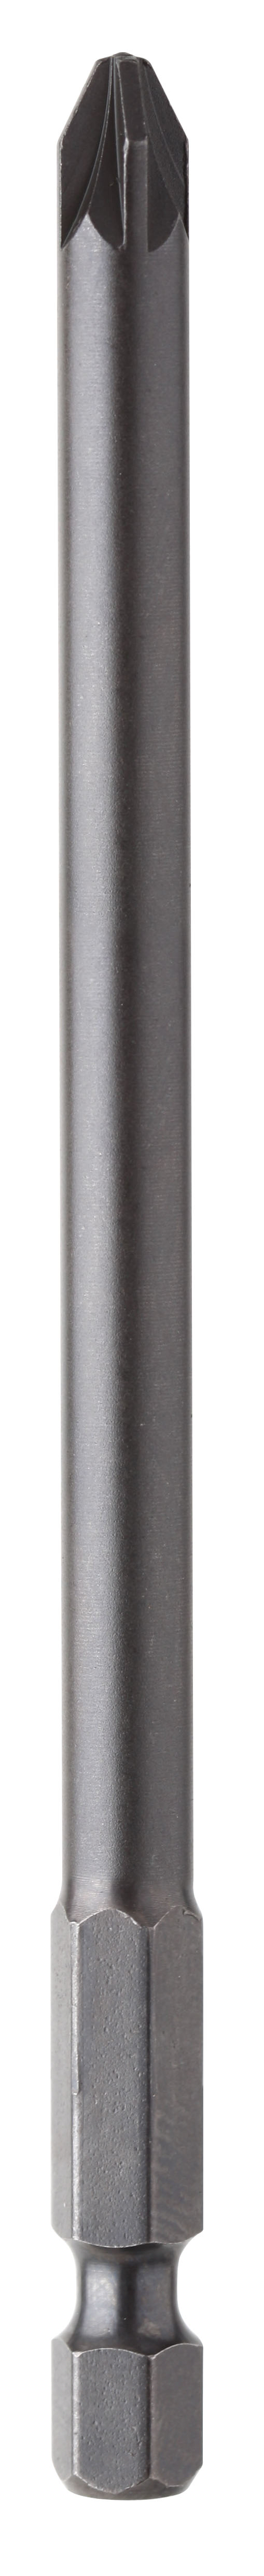 Screwdriving Quality bit Phillipps industry bits length 50 to 150 mm with reduced shank - U620PZ2 110.jpg